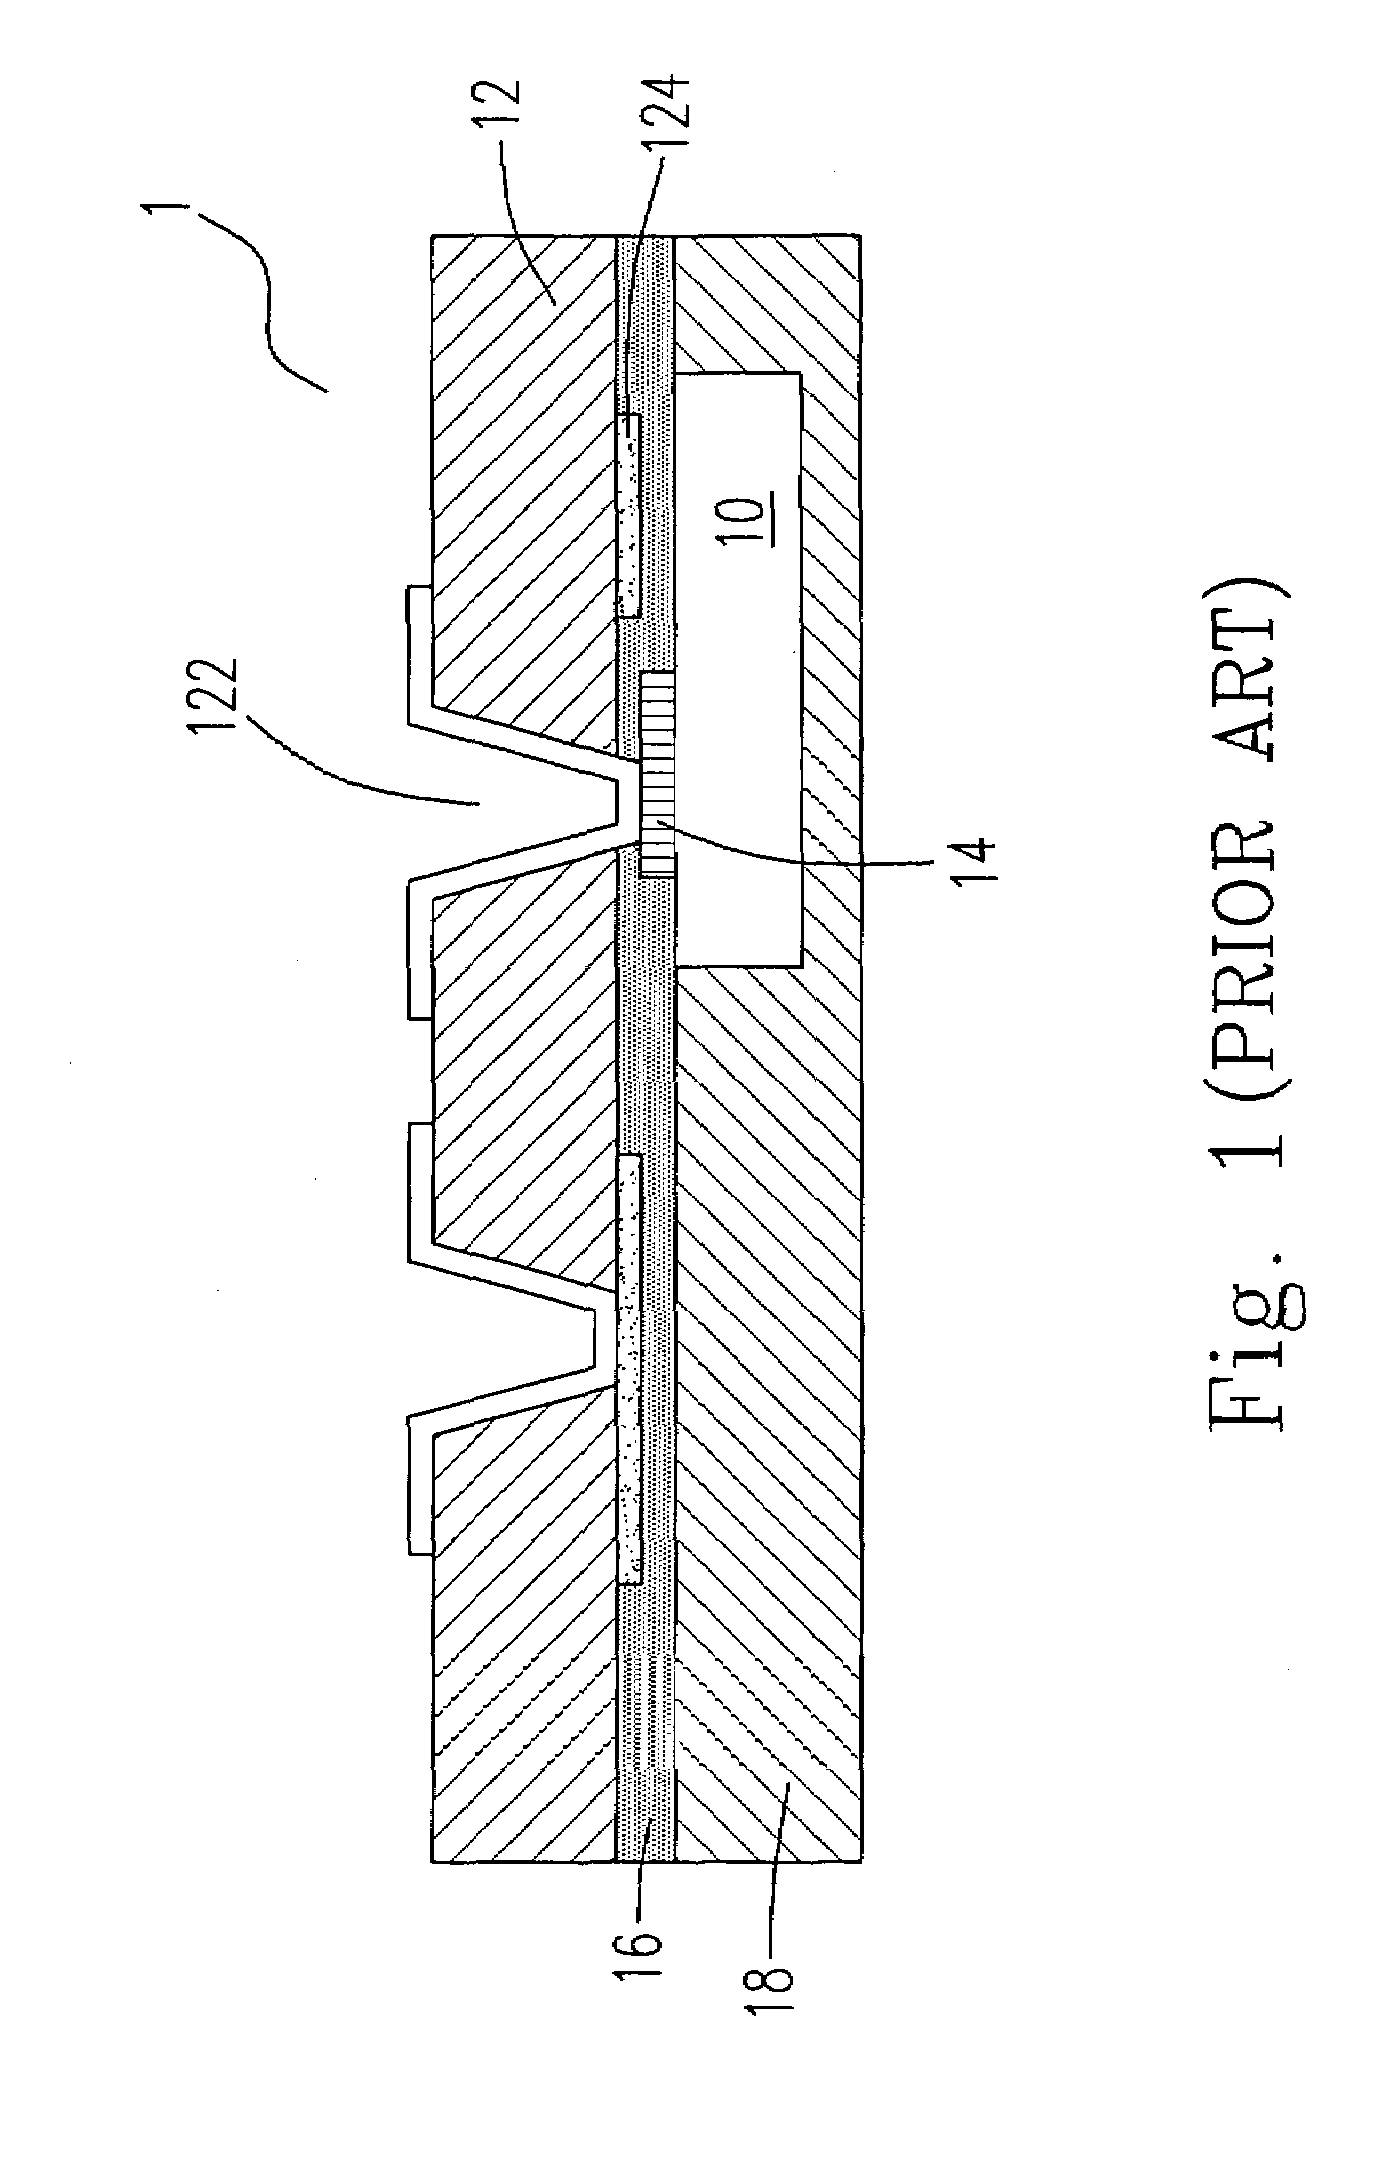 Thermal enhanced low profile package structure